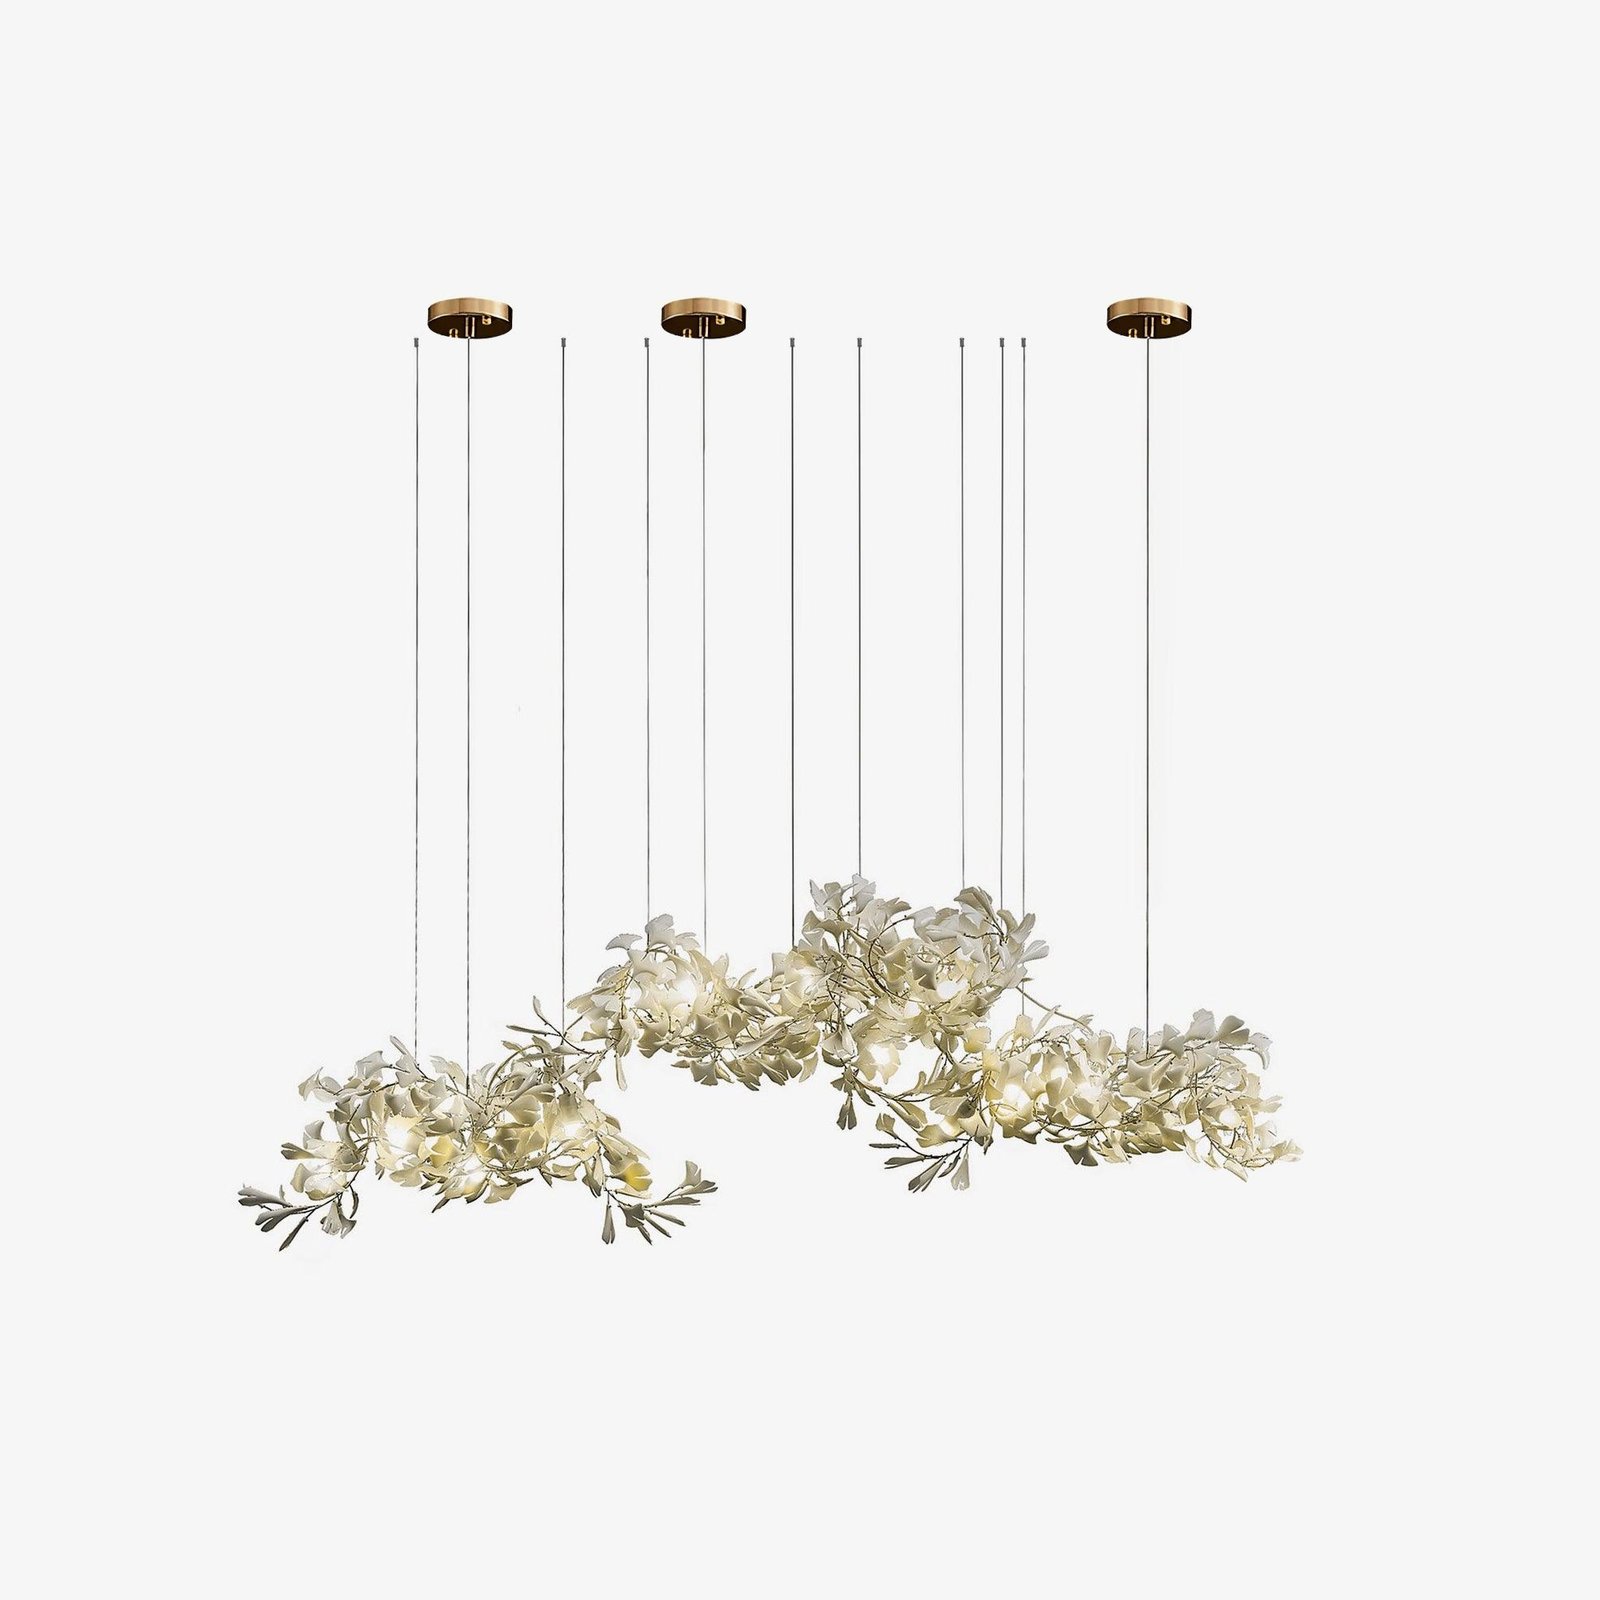 Gingko Chandelier C L 98.4″ x H 78.7″ in Gold and White with Canopy (3 pieces), L 250cm x H 200cm